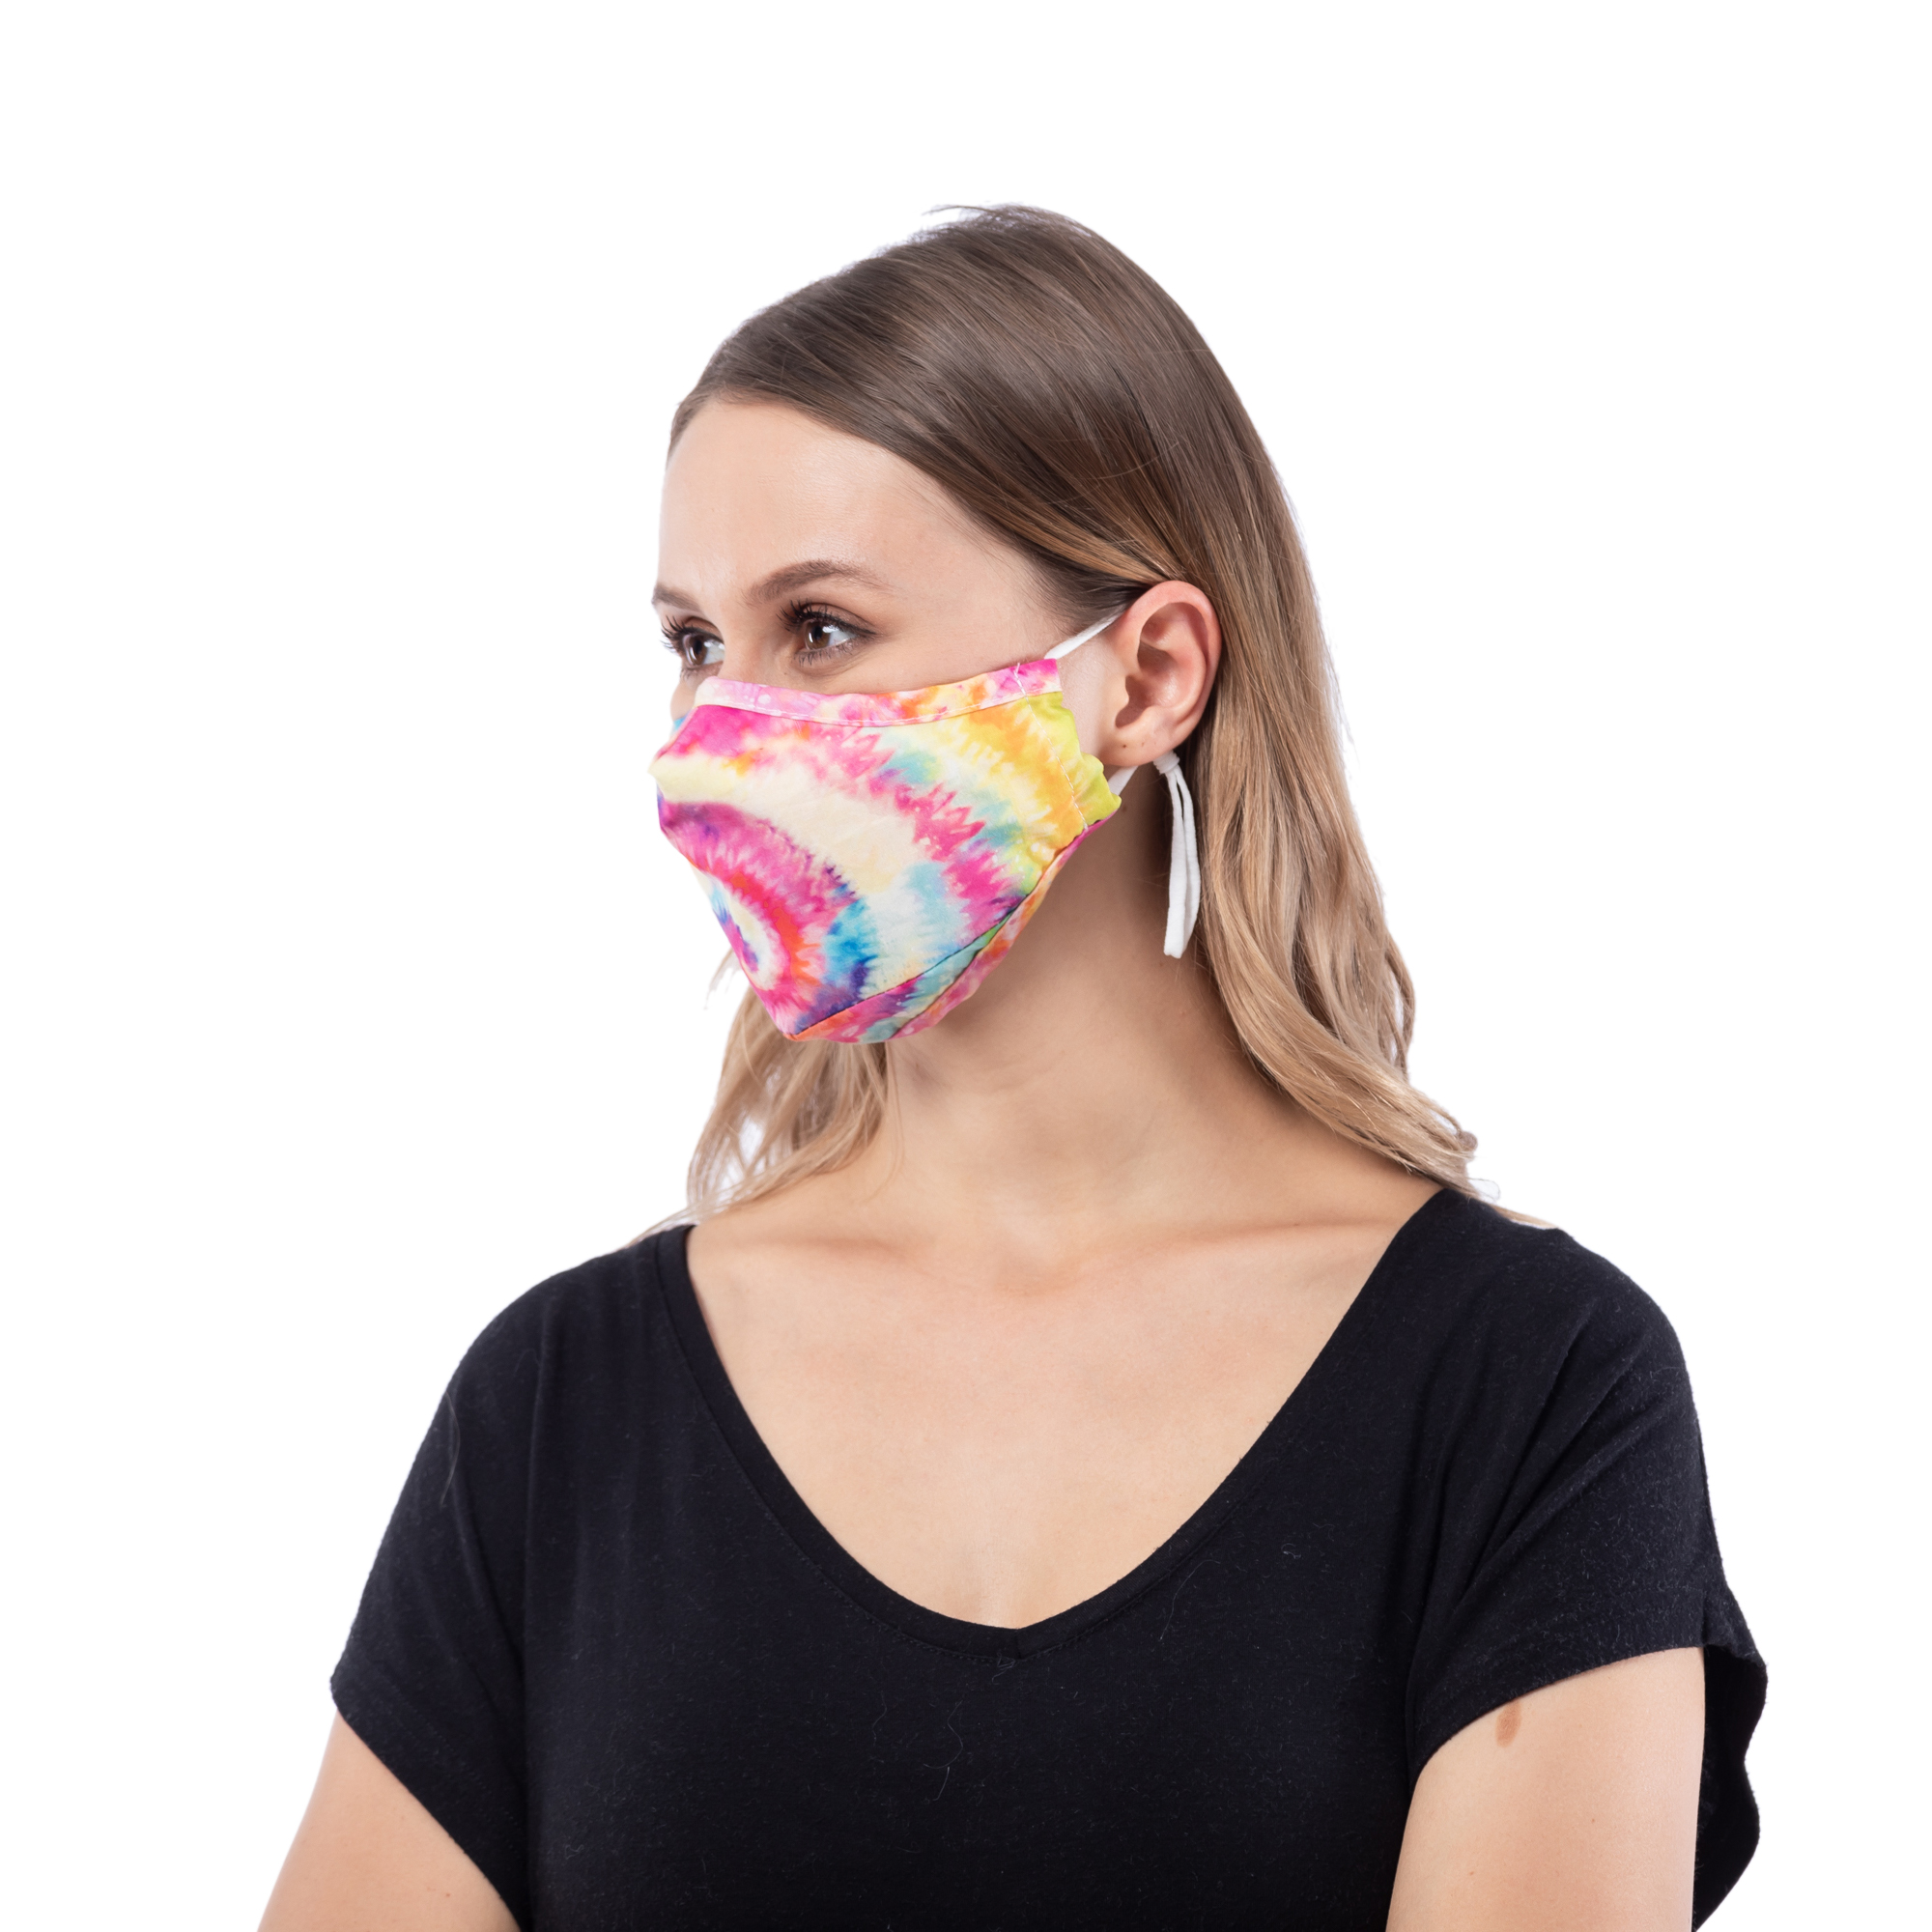 Adult 4-Layer Cotton Mask - Includes 1 Replaceable PM2.5 Filter and Adjustable Ear Straps - TIE DYE